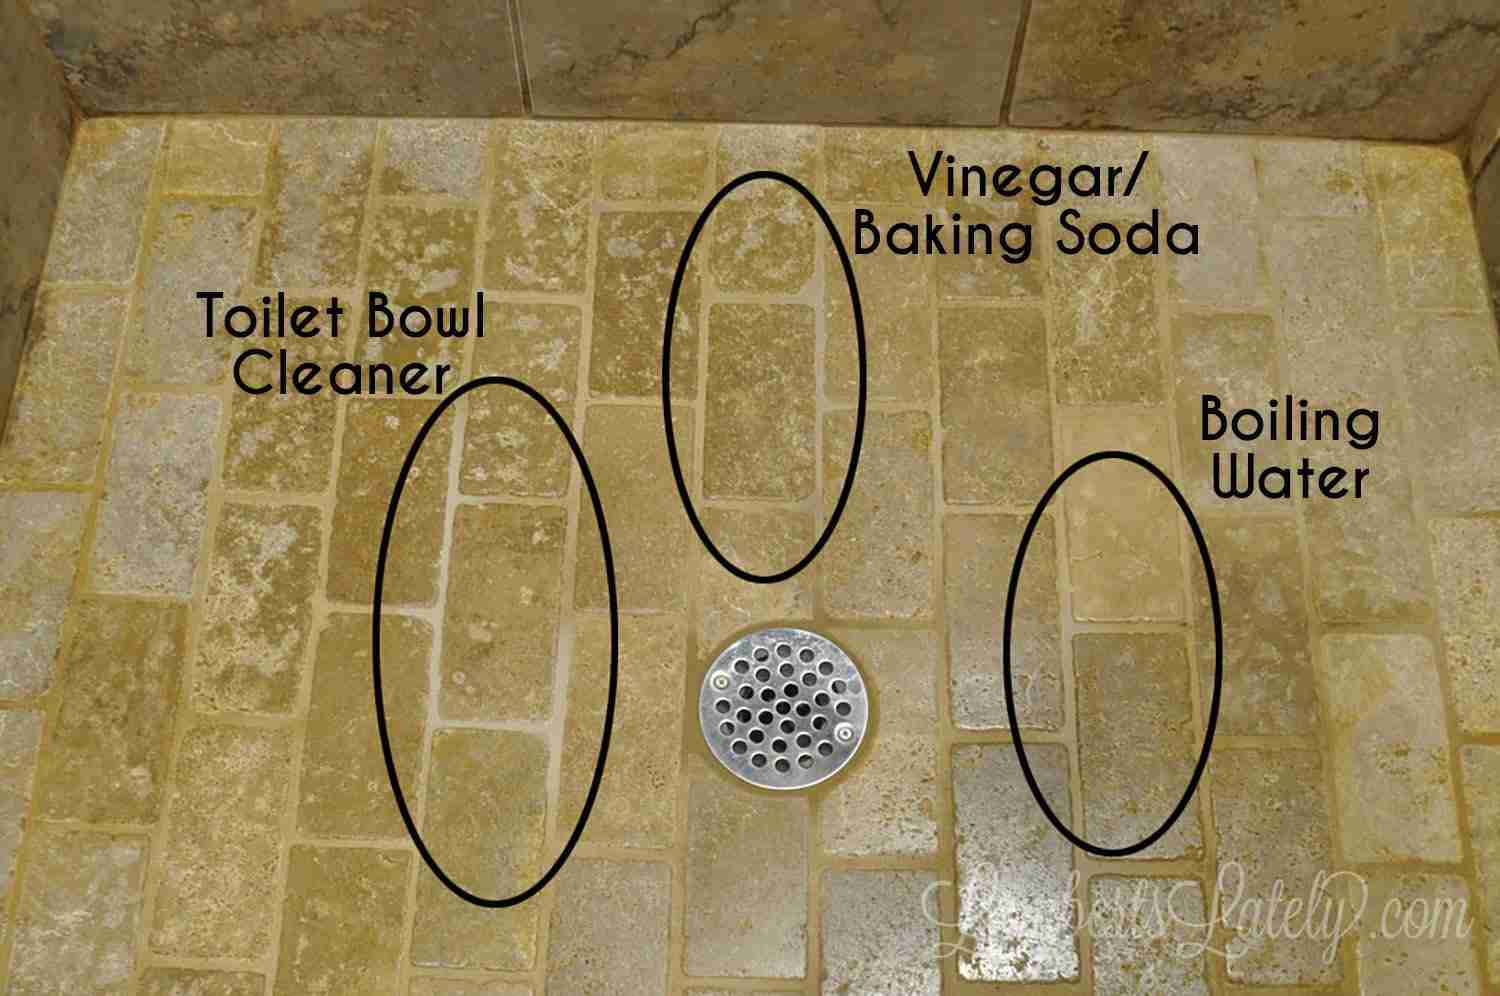 This post looks at a few of the popular ways to clean tile grout (baking soda and vinegar, bleach toilet bowl cleaner, and boiling water) to see which one really works best. Learn how to clean grout the effective way!